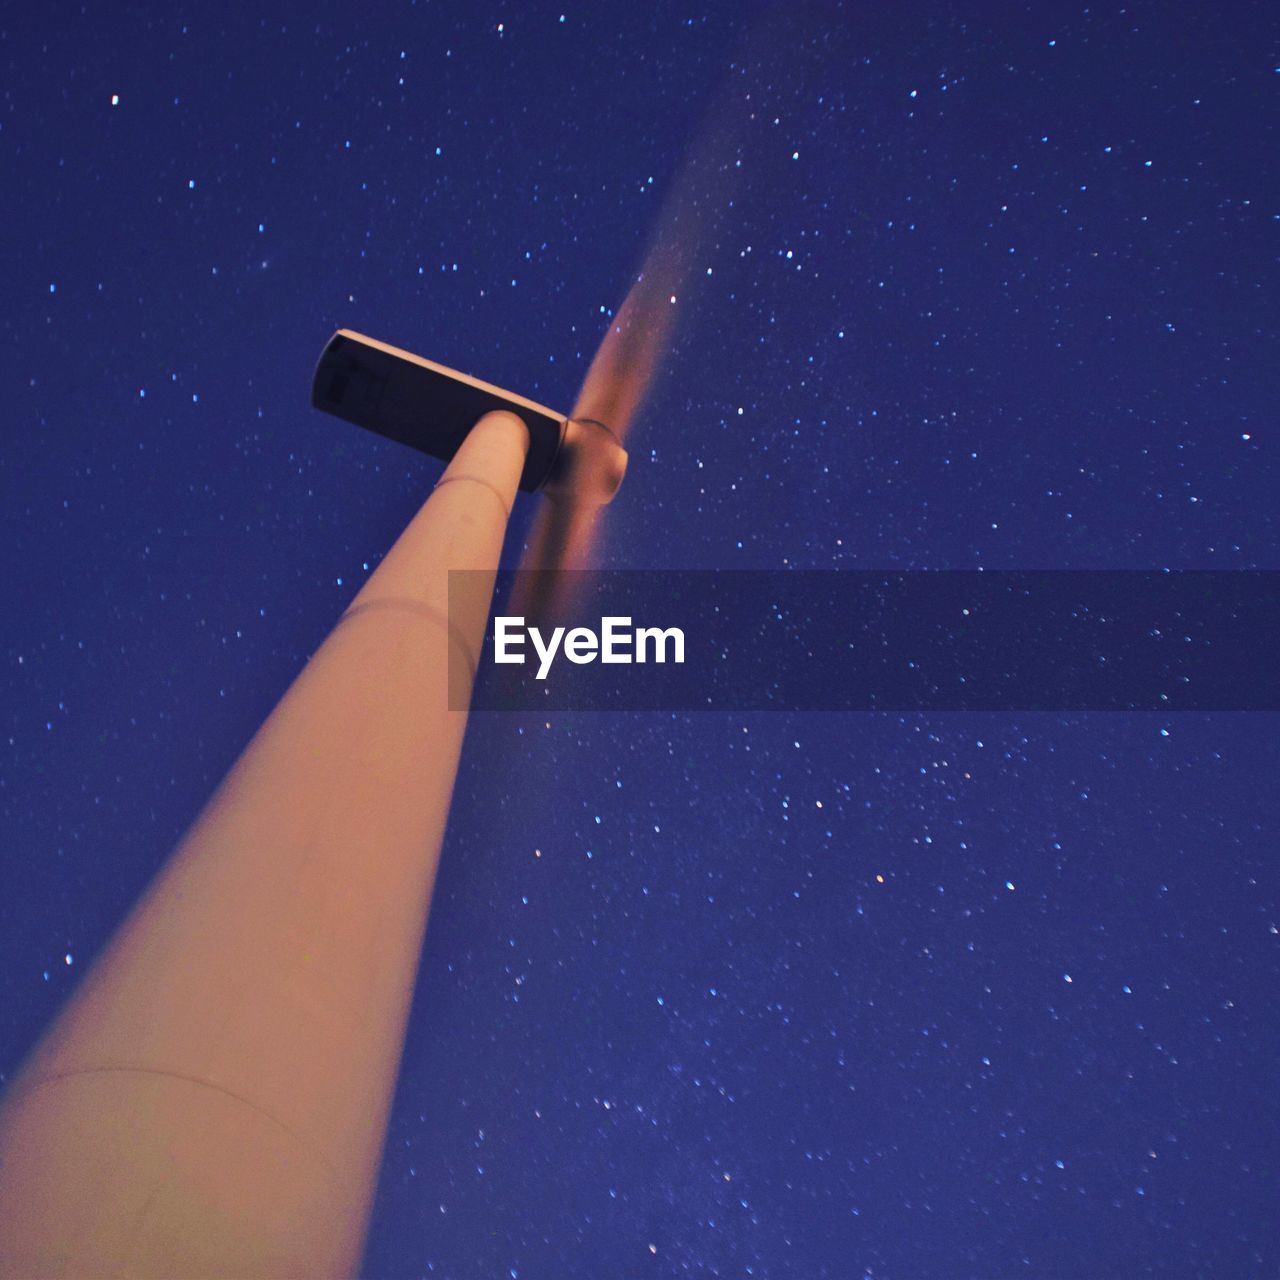 Low angle view of windmill against star field